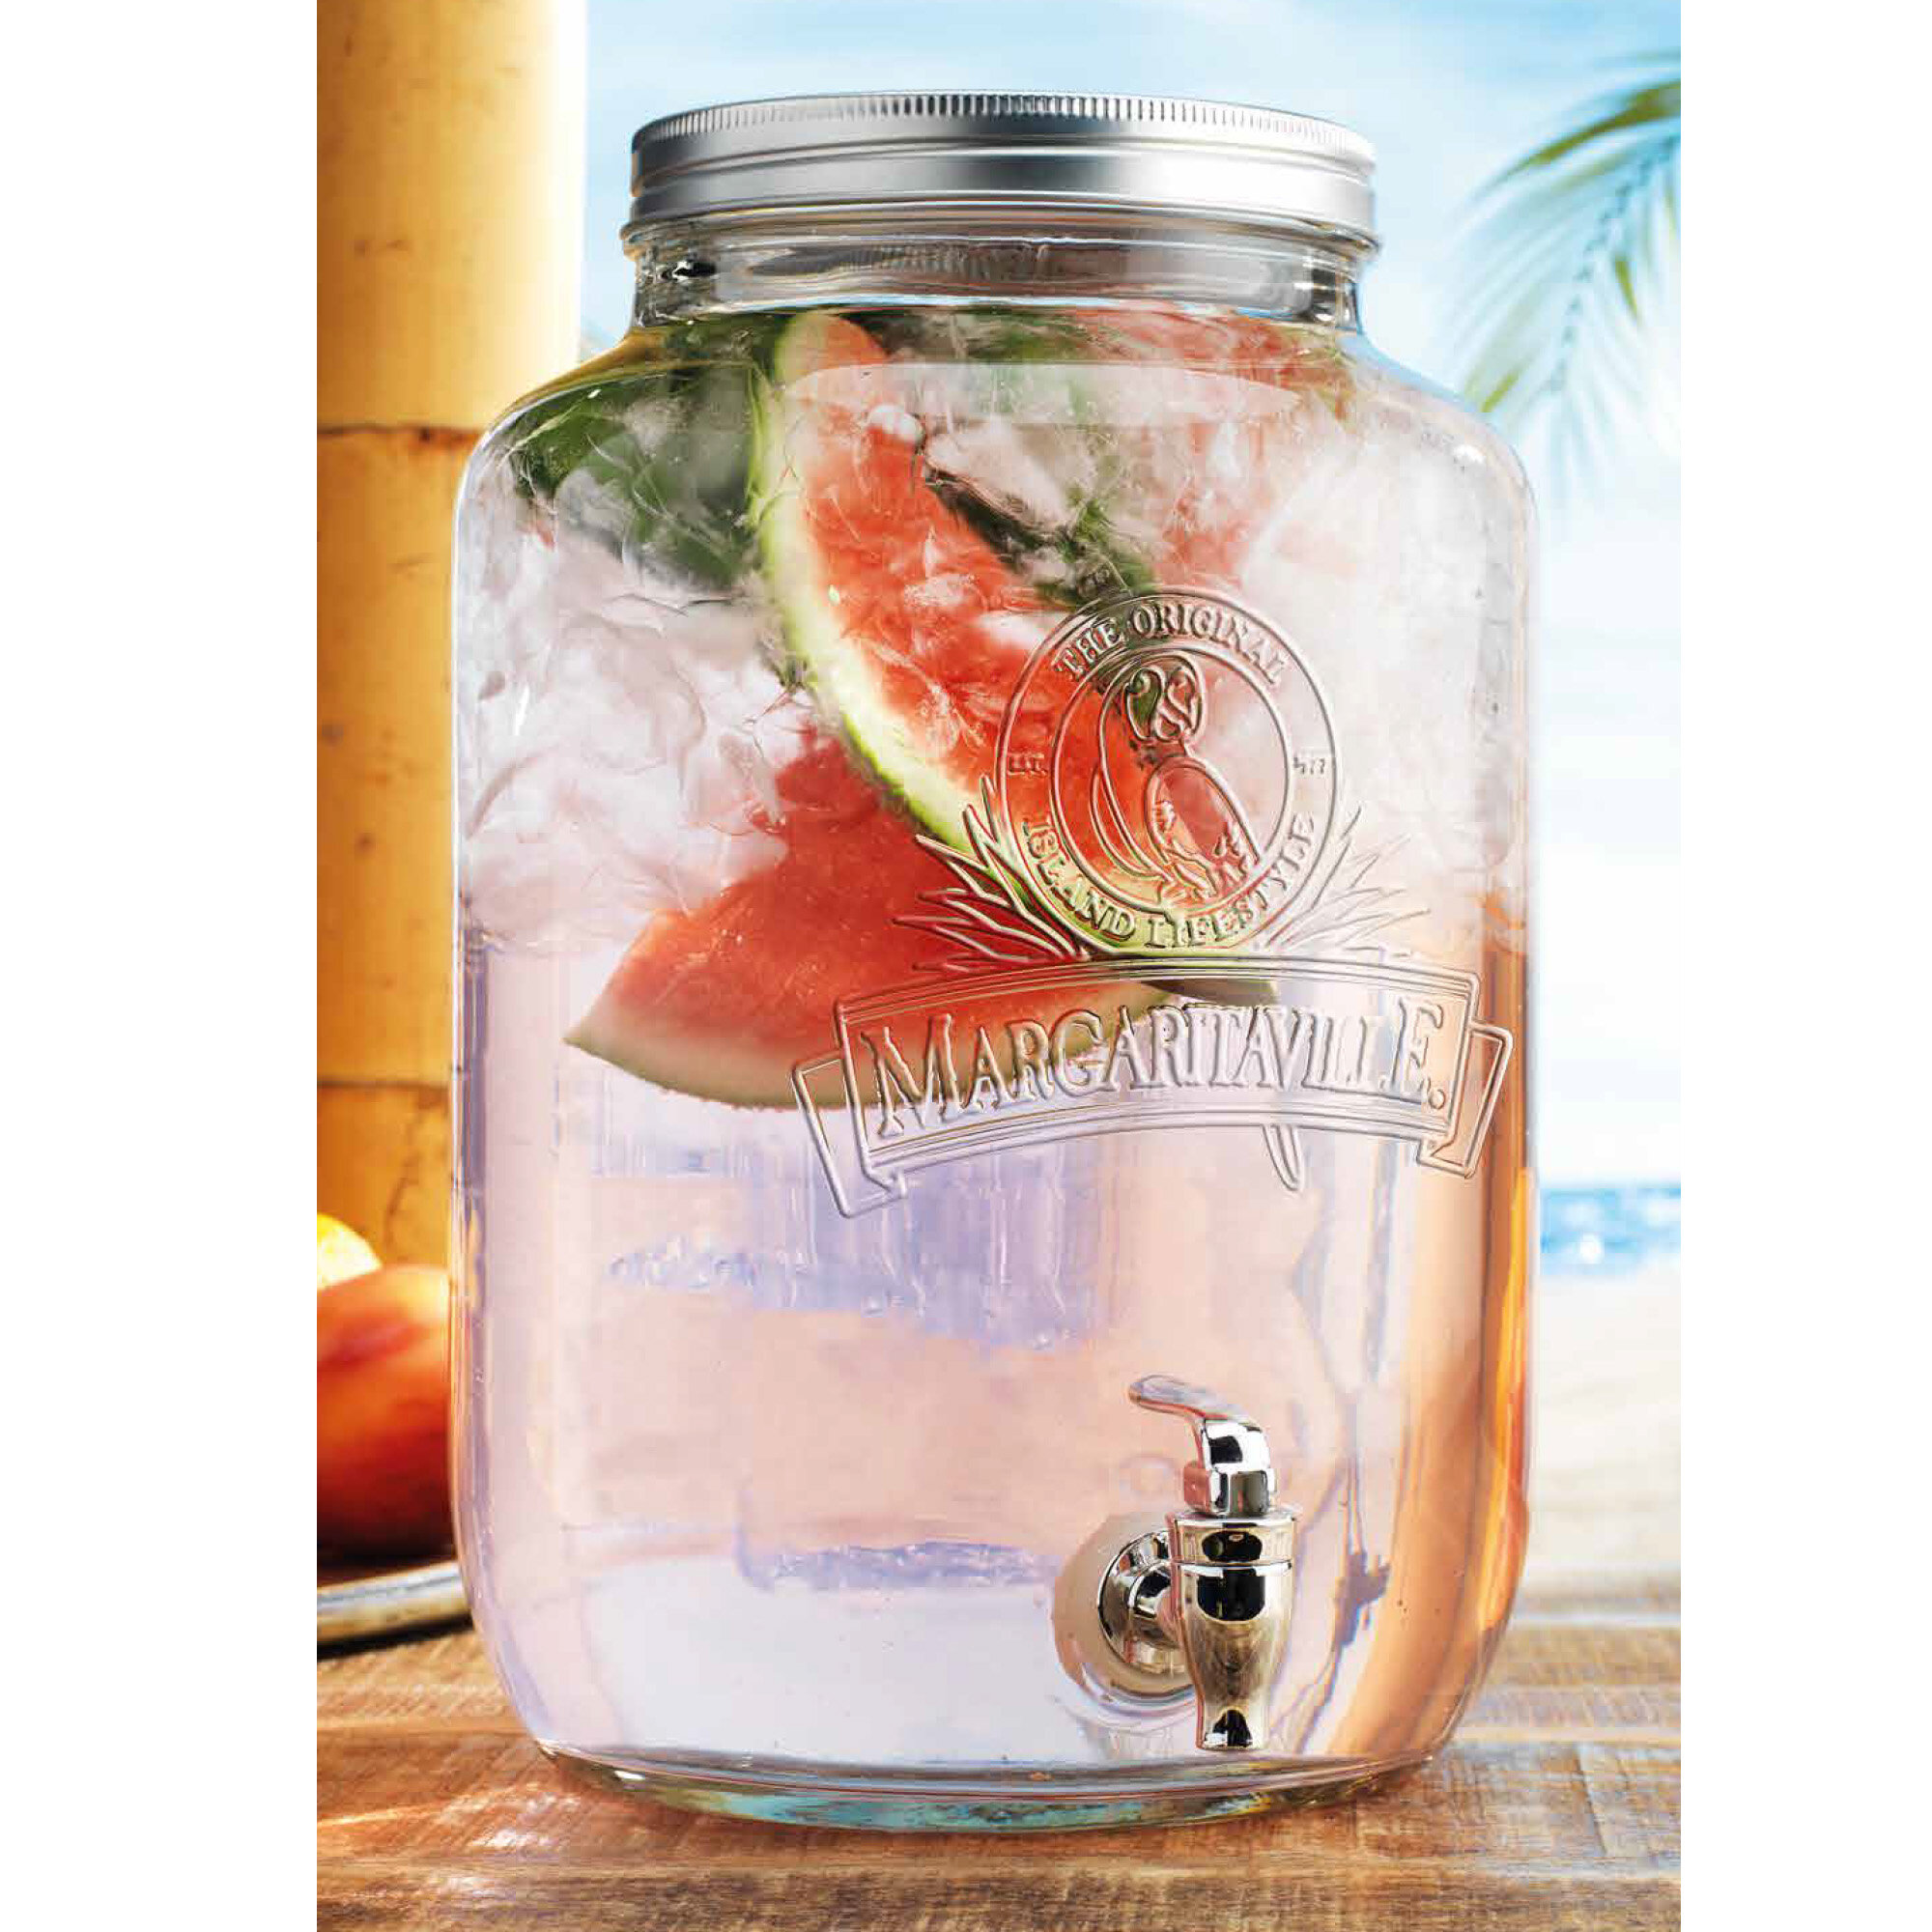 Service Ideas 1.5 Gallon Beverage Dispenser With Infuser Wall